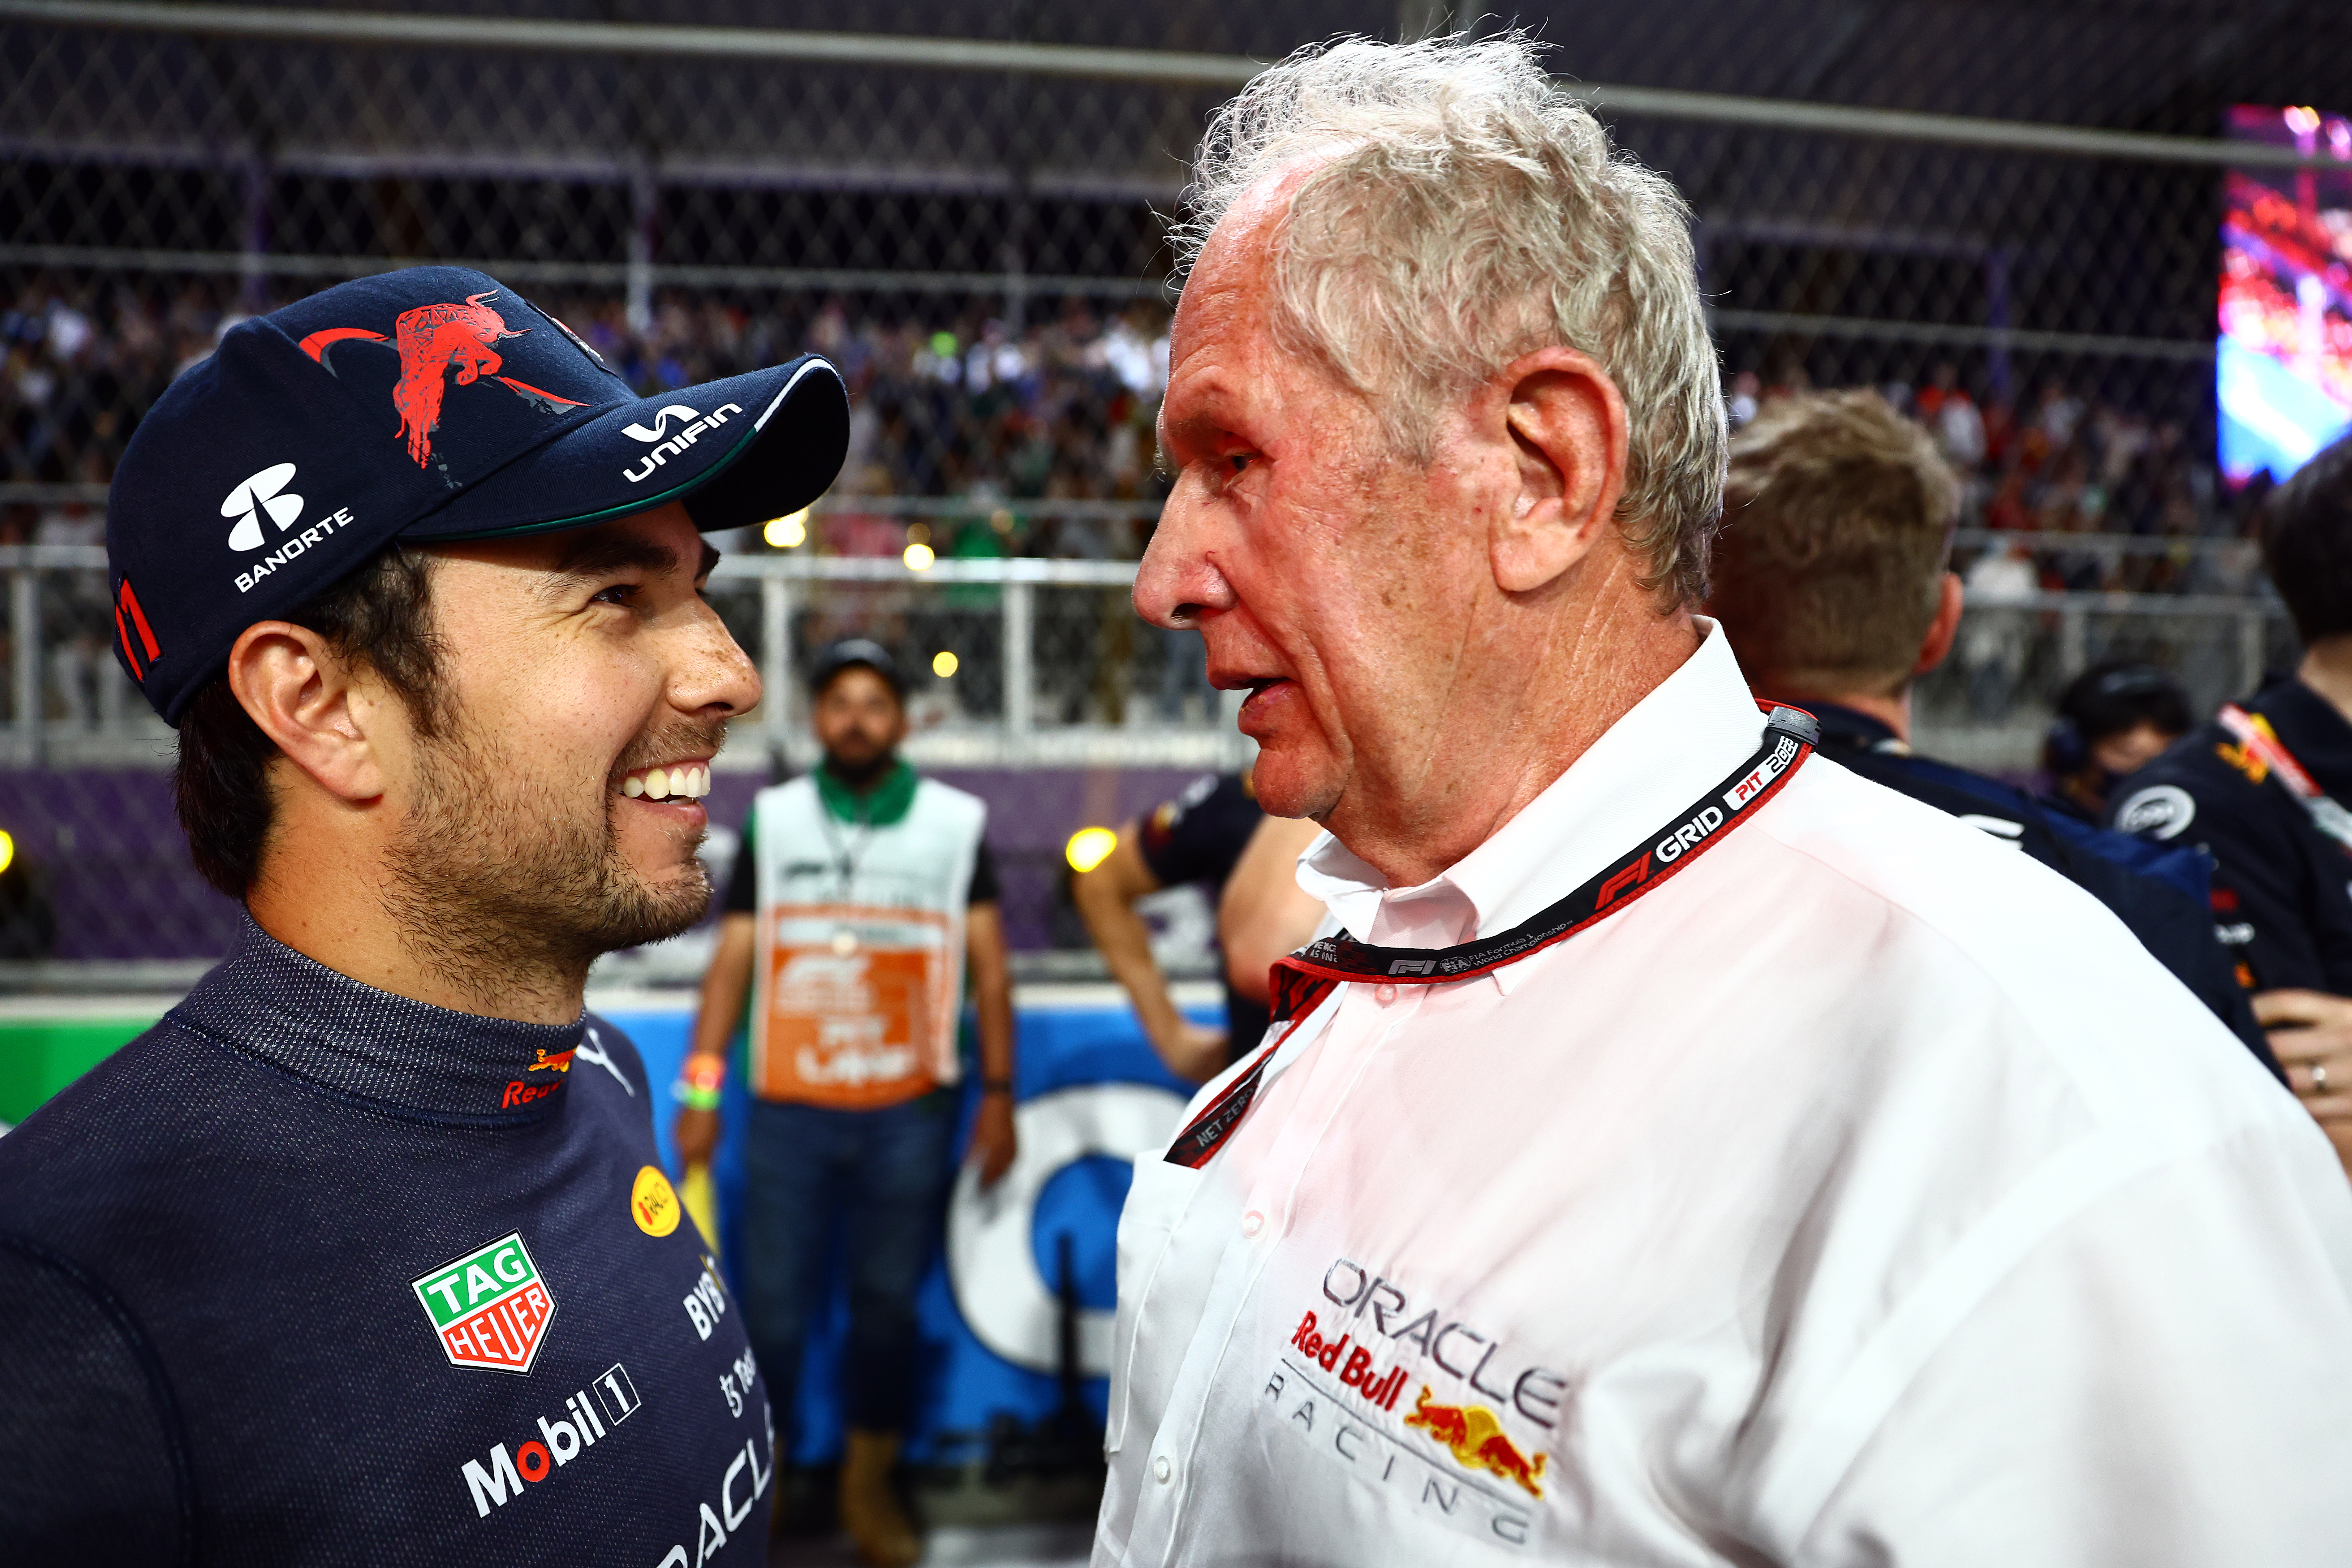 Helmut Marko praised the performance of Checo Pérez at the start of the 2023 season (Photo: Getty Images)